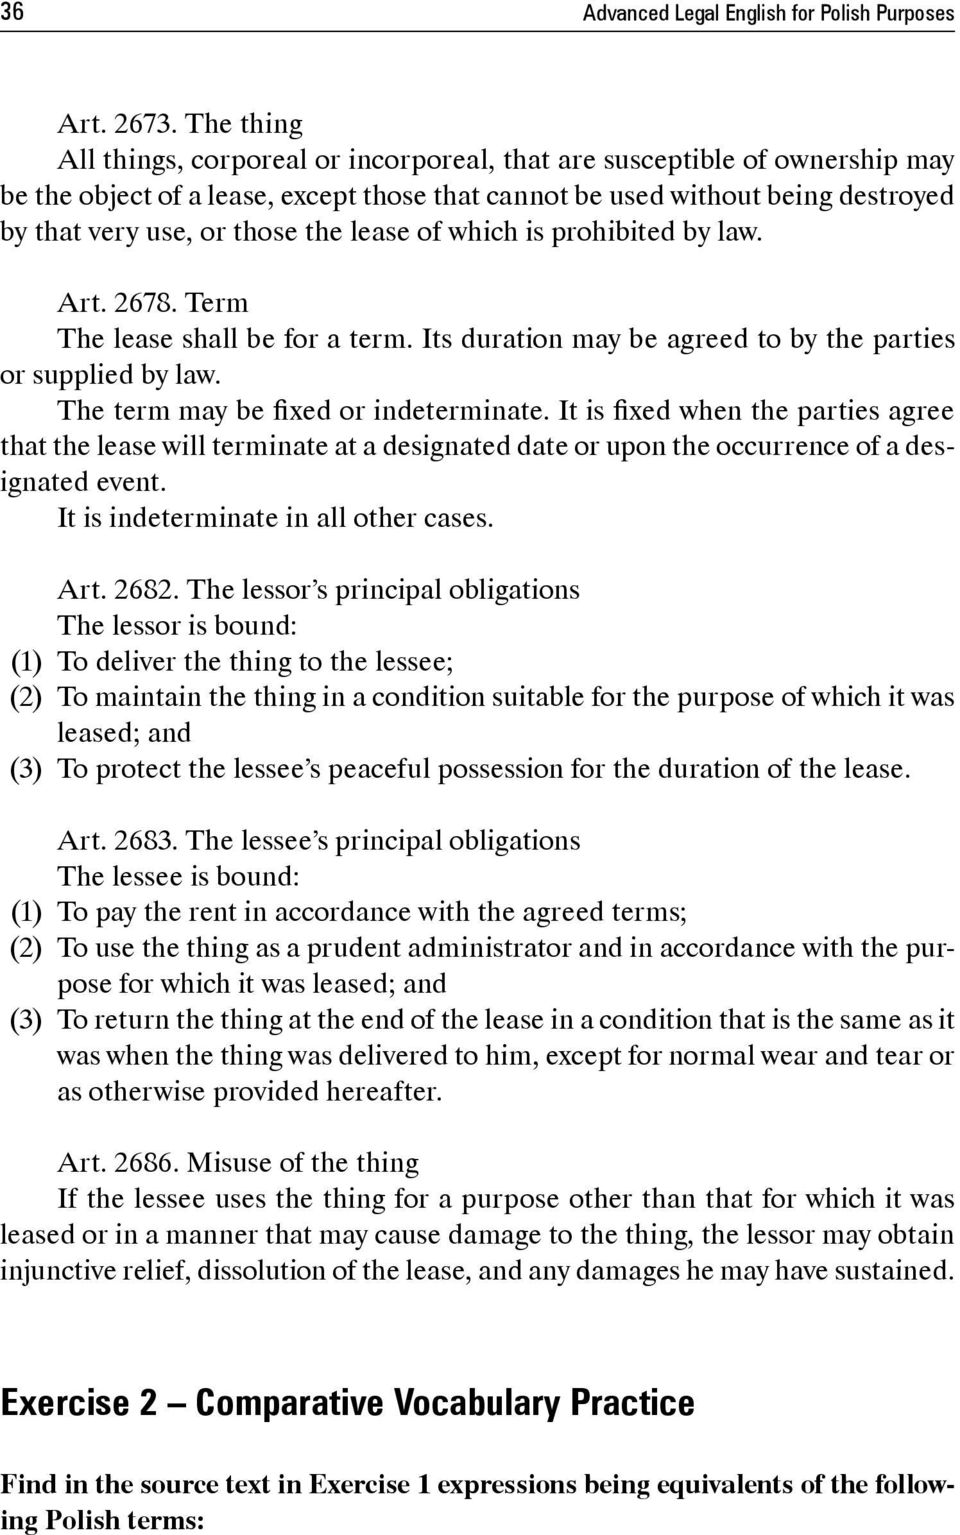 lease of which is prohibited by law. Art. 2678. Term The lease shall be for a term. Its duration may be agreed to by the parties or supplied by law. The term may be fixed or indeterminate.